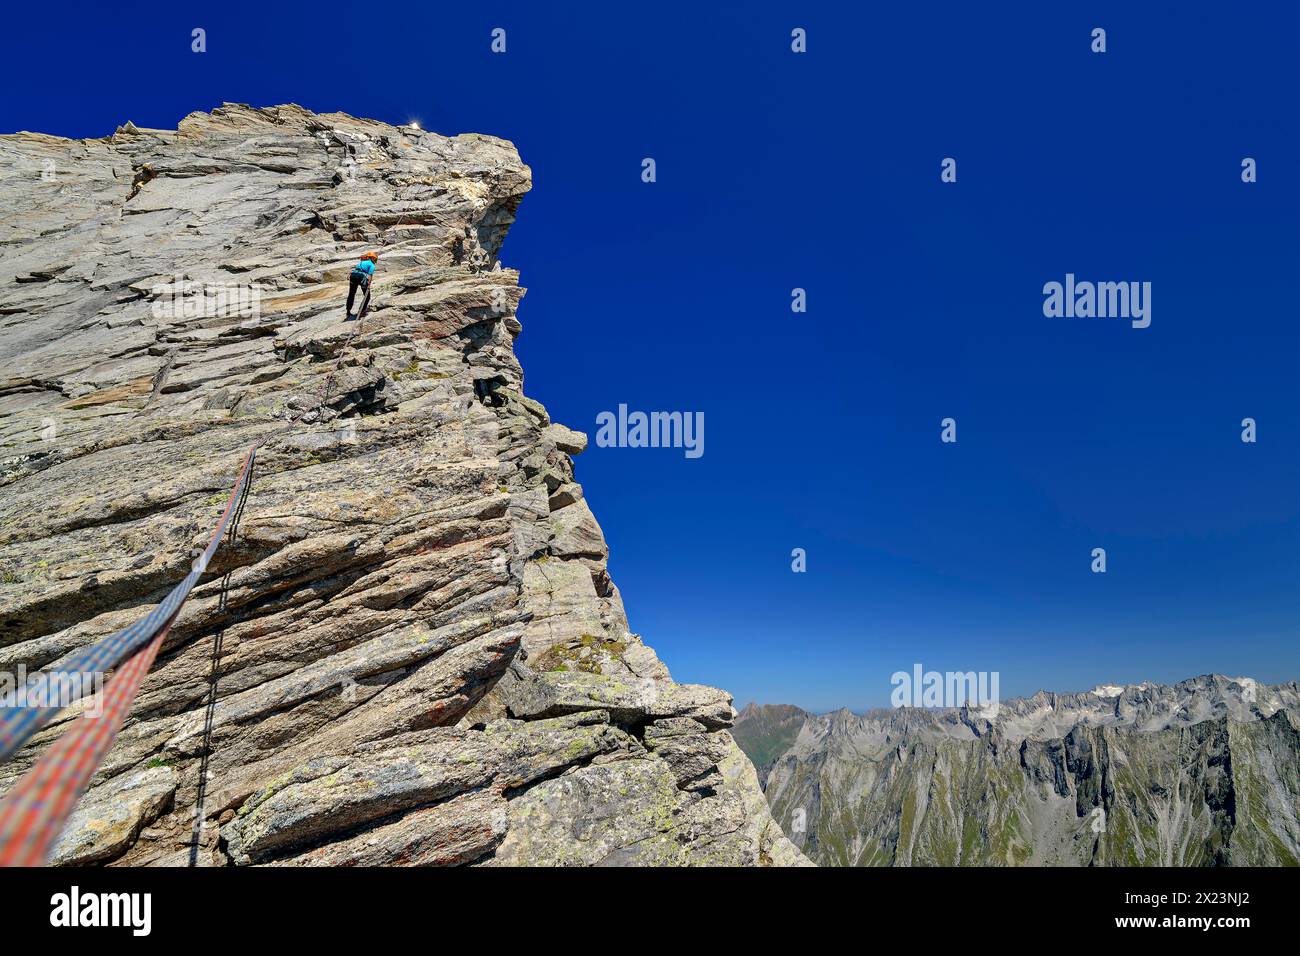 Woman climbing abseiling from the Zsigmondyspitze, Zsigmondyspitze, Zillertal Alps, Zillertal Alps Nature Park, Tyrol, Austria Stock Photo